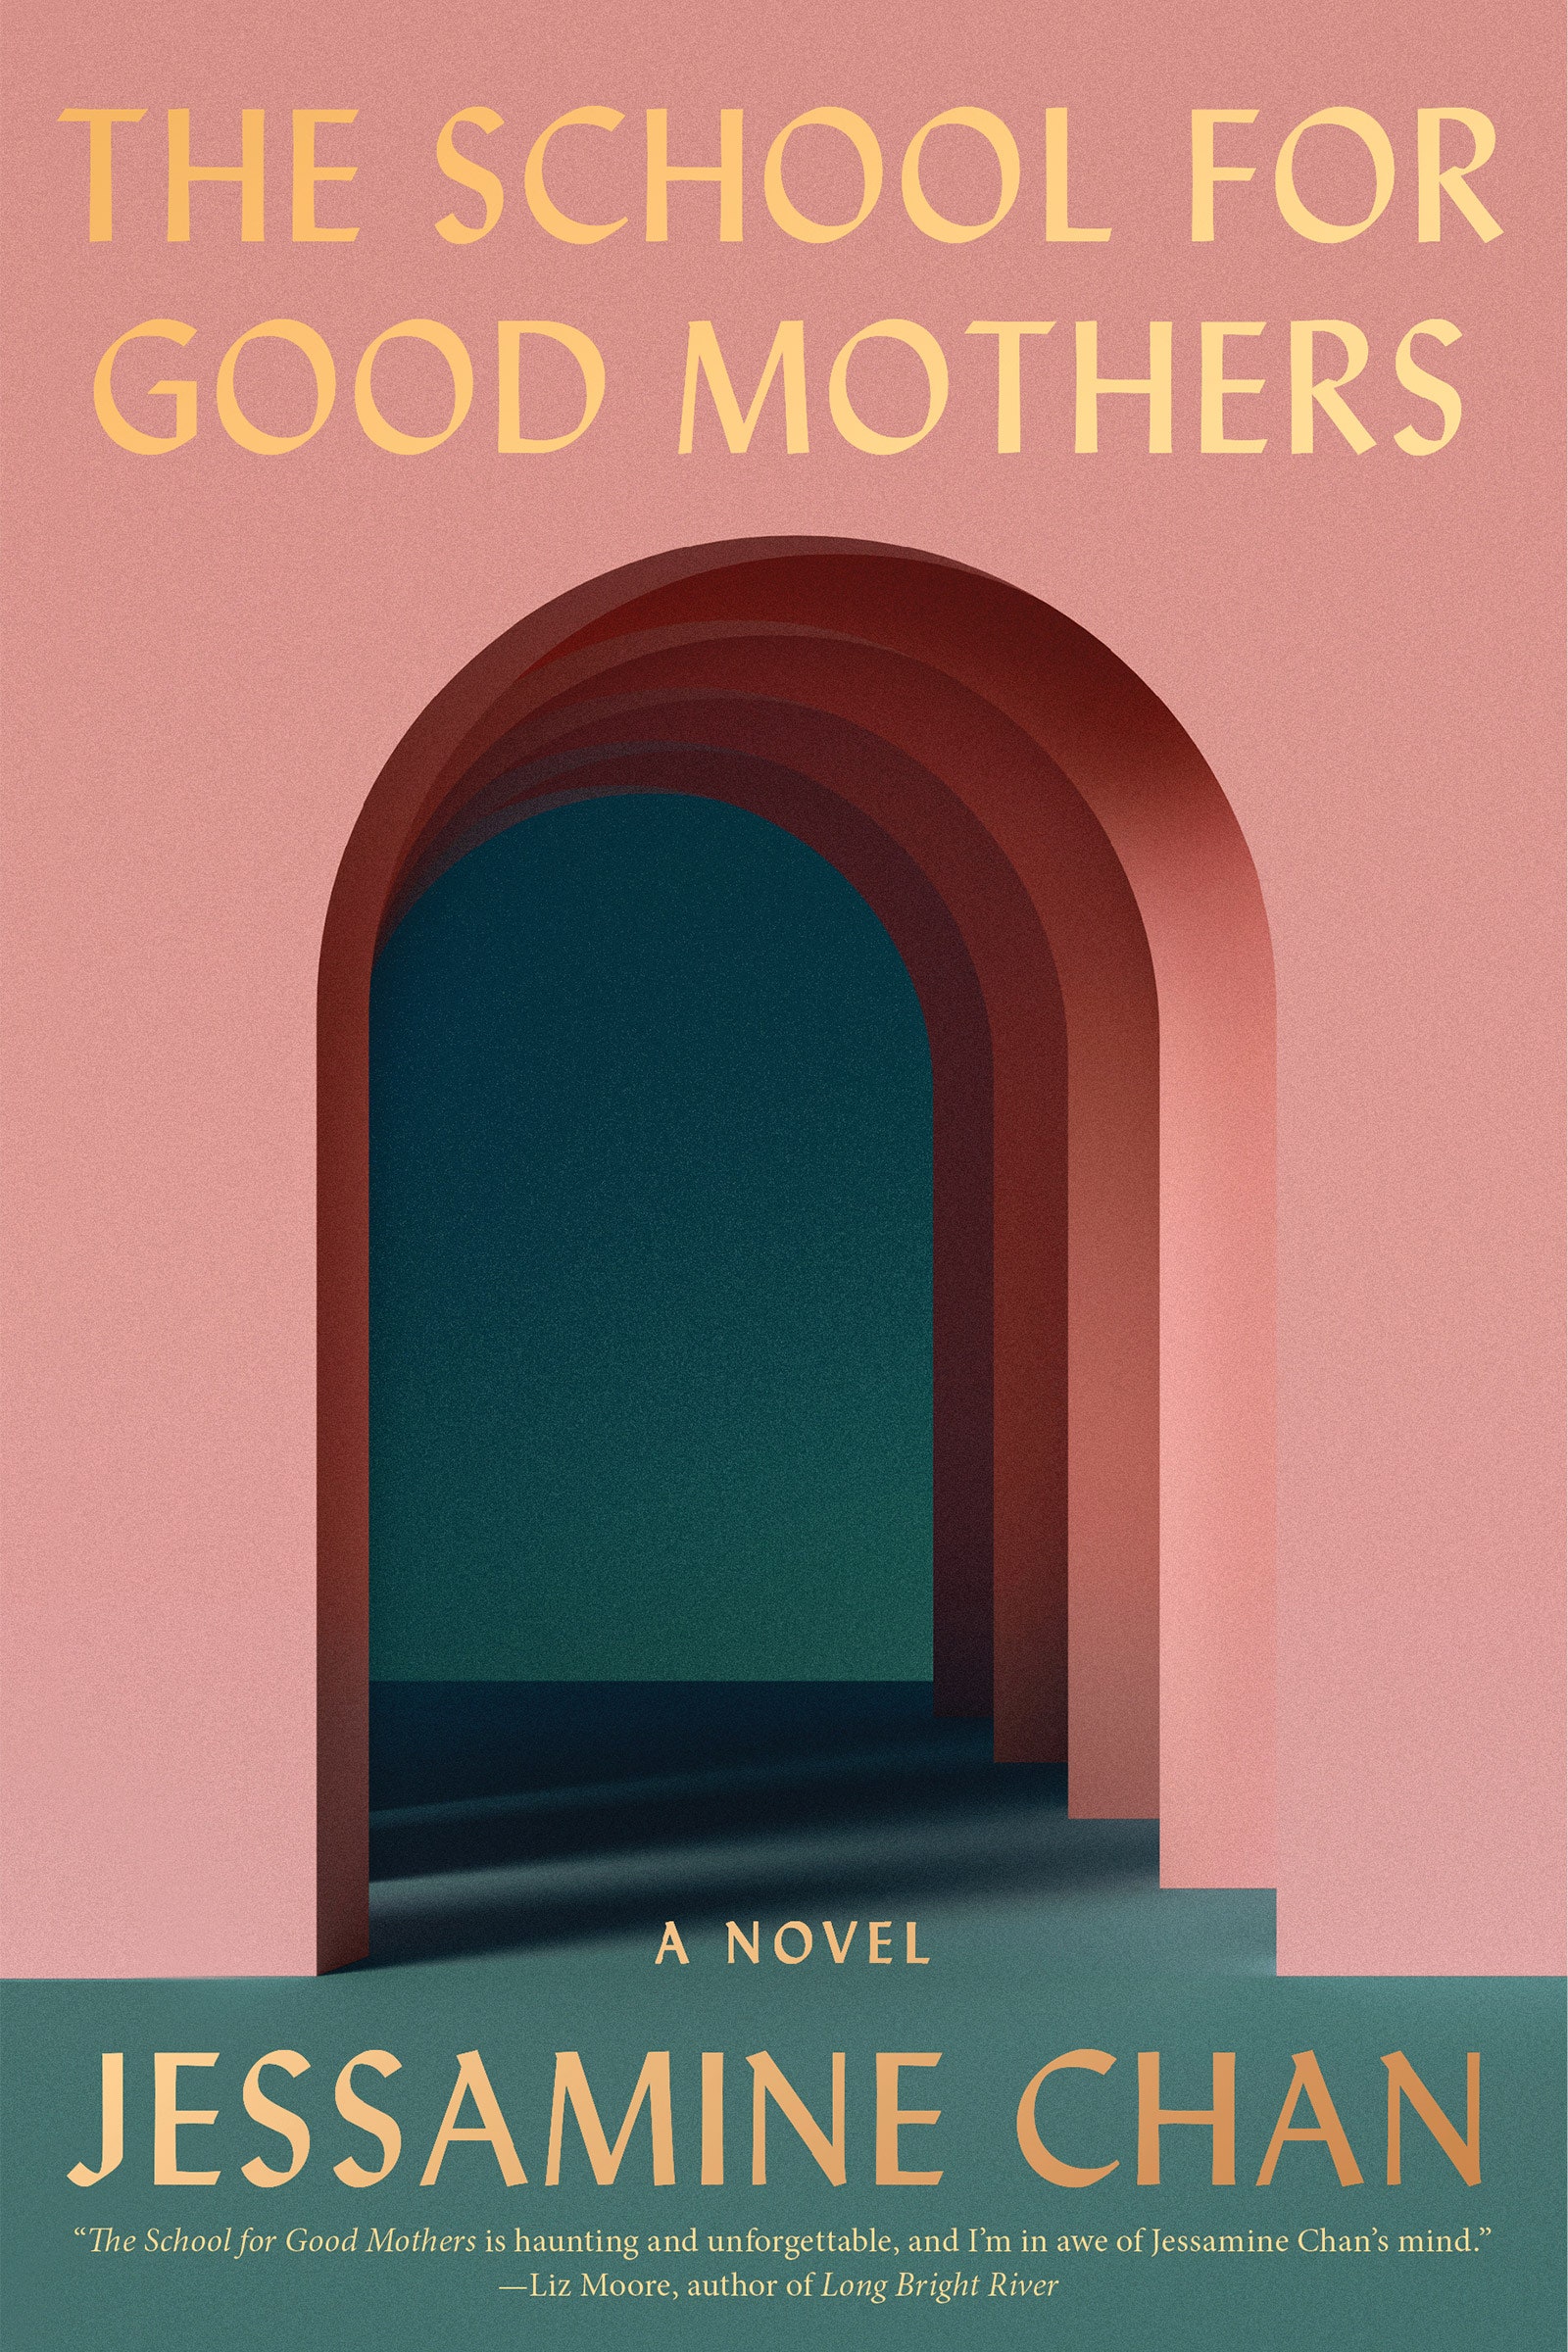 Book jacket The School for Good Mothers pink arched tunnel with blue green pathway